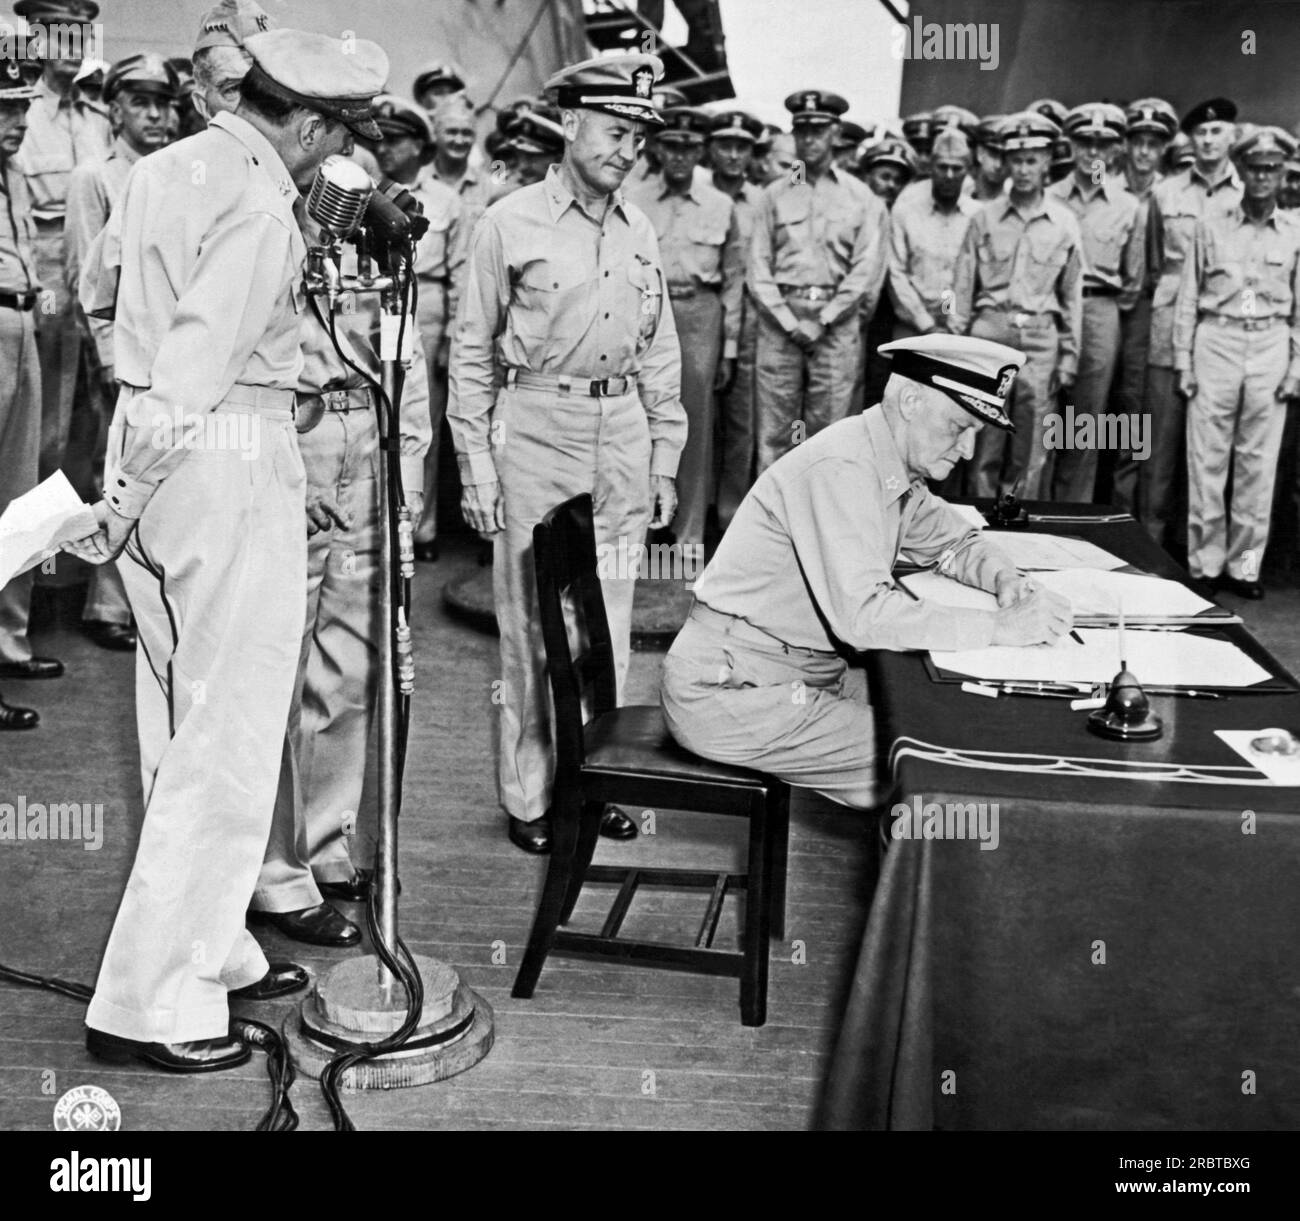 Tokyo,, Japan:  September 1, 1945 Fleet Admiral Chester Nimitz signs for the United States during the Japanese surrender ceremony aboard the USS Missouri in Tokyo Bay. General of the Army Douglas MacArthur is standing at the left at the microphone.. Stock Photo